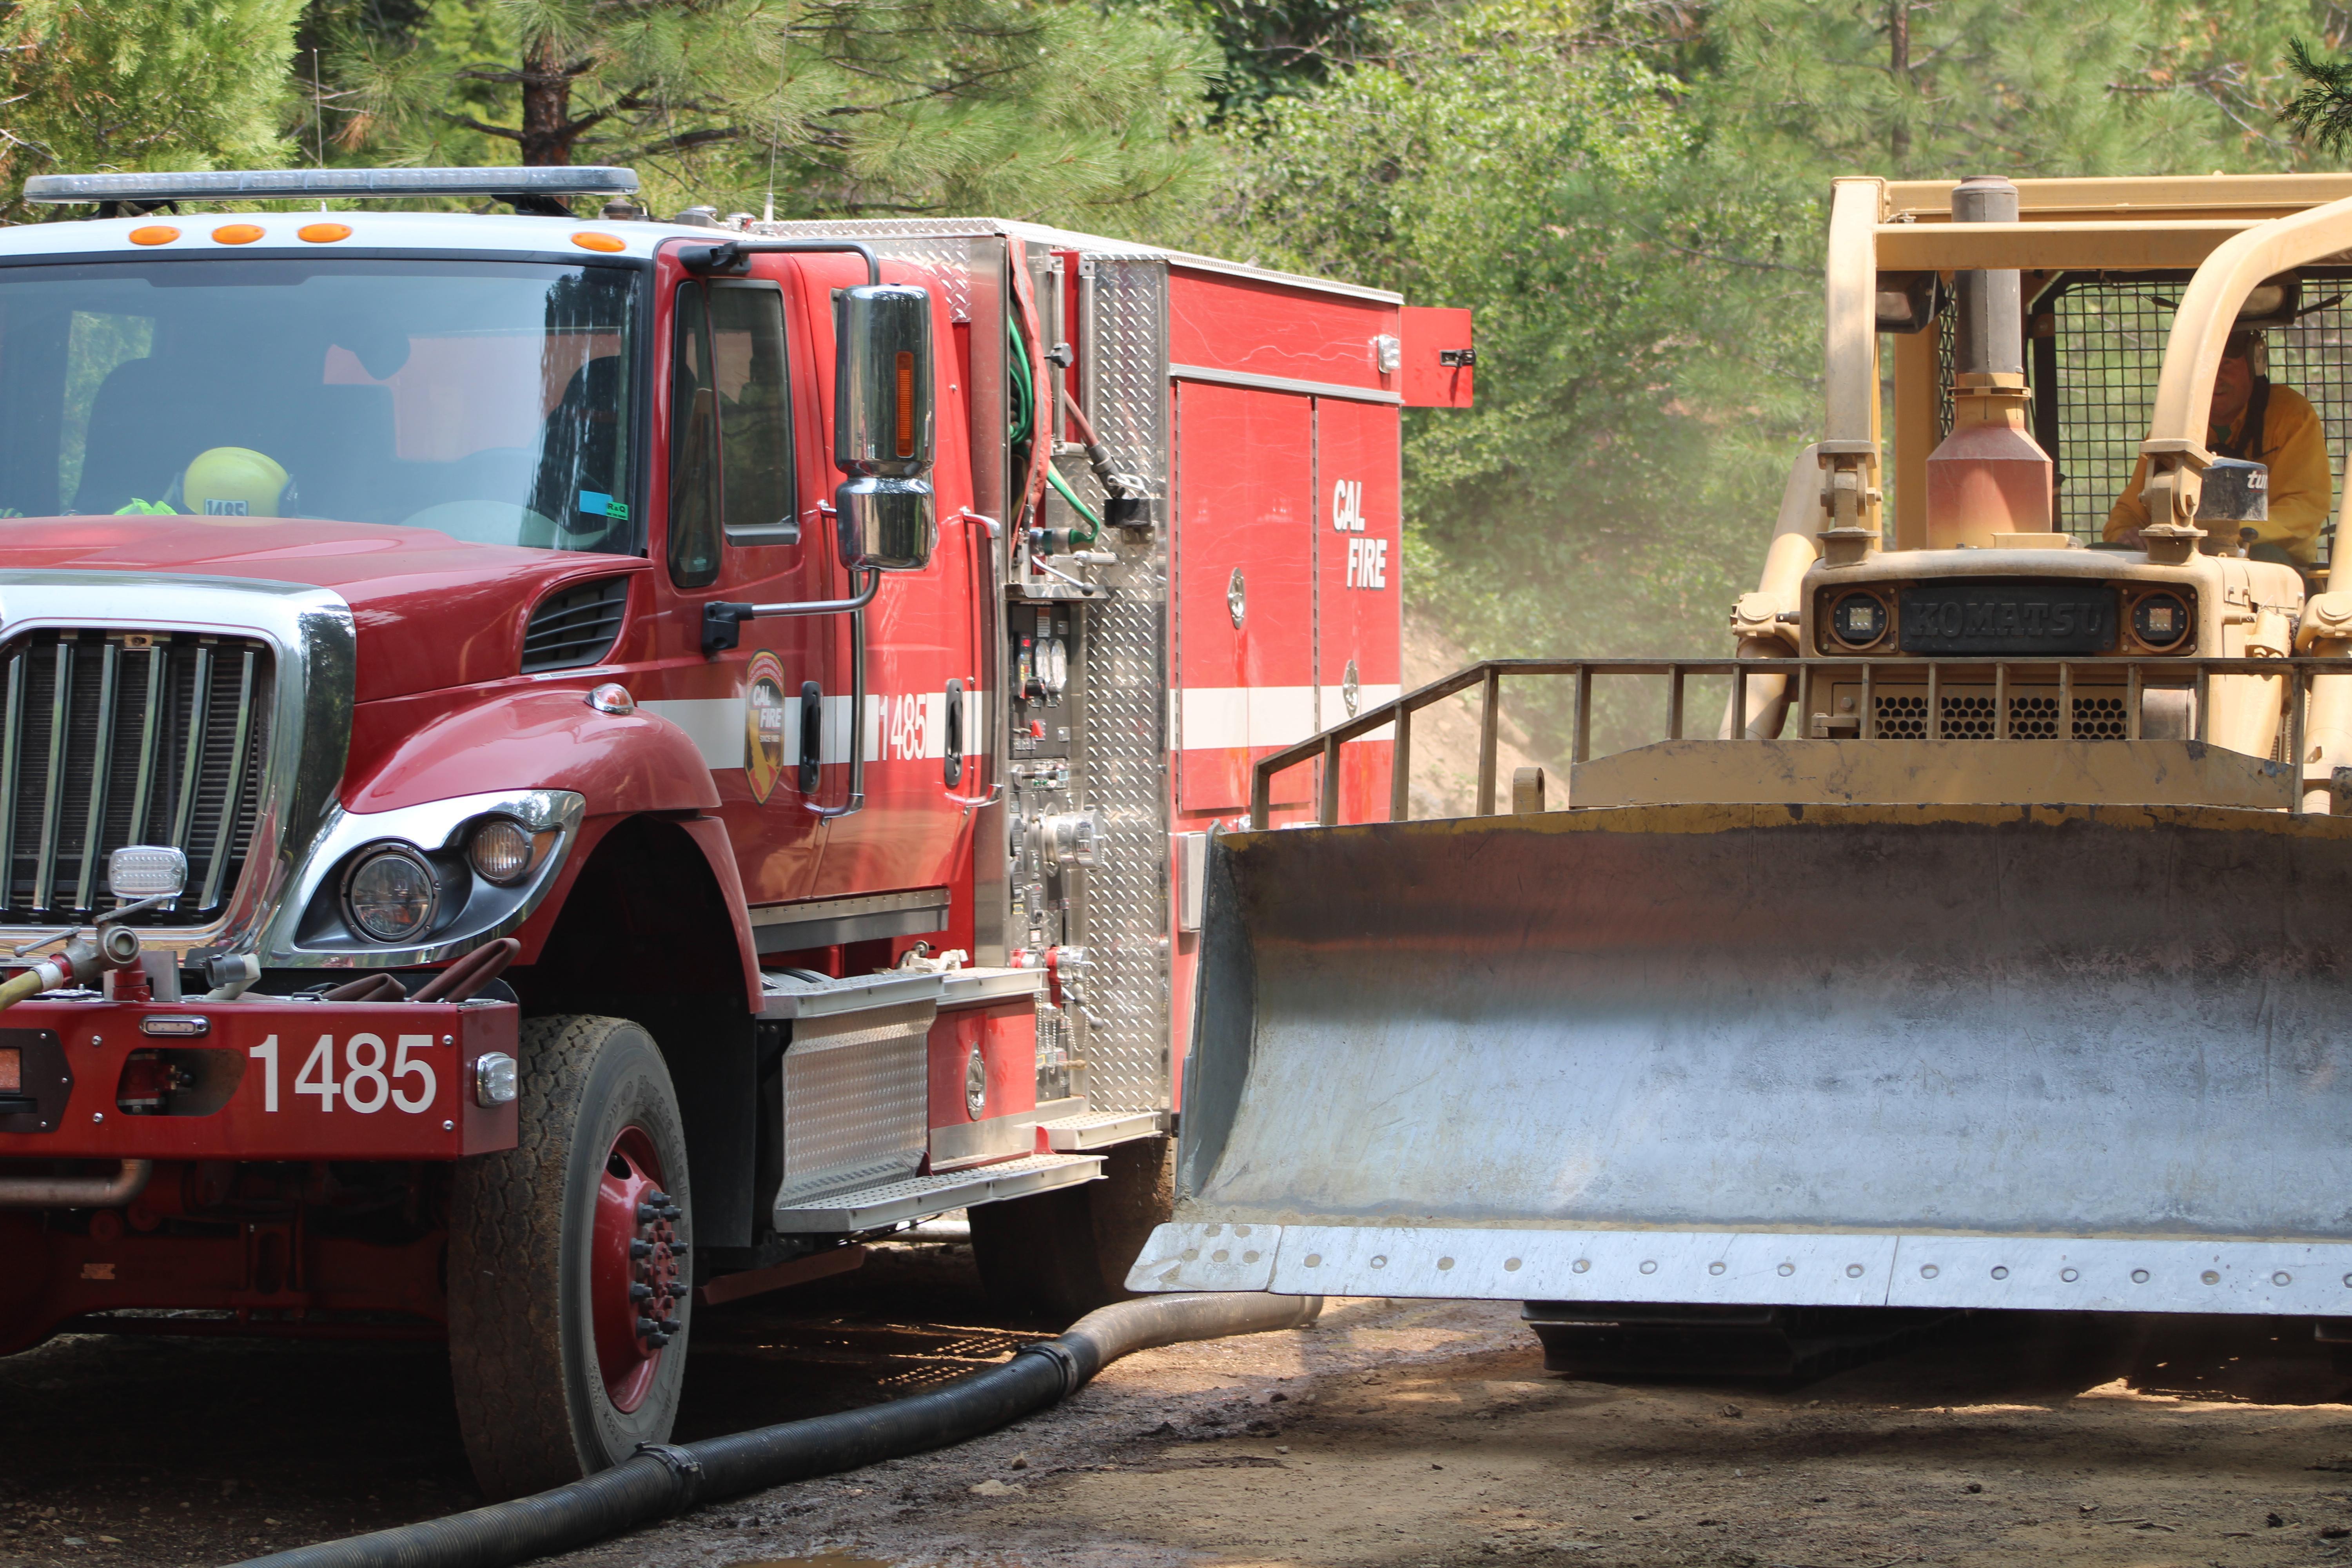 Dozer moving into position on Smokey fire off Beaver Creek road on August 4, 2022 (USFS/Steve McQuillan)